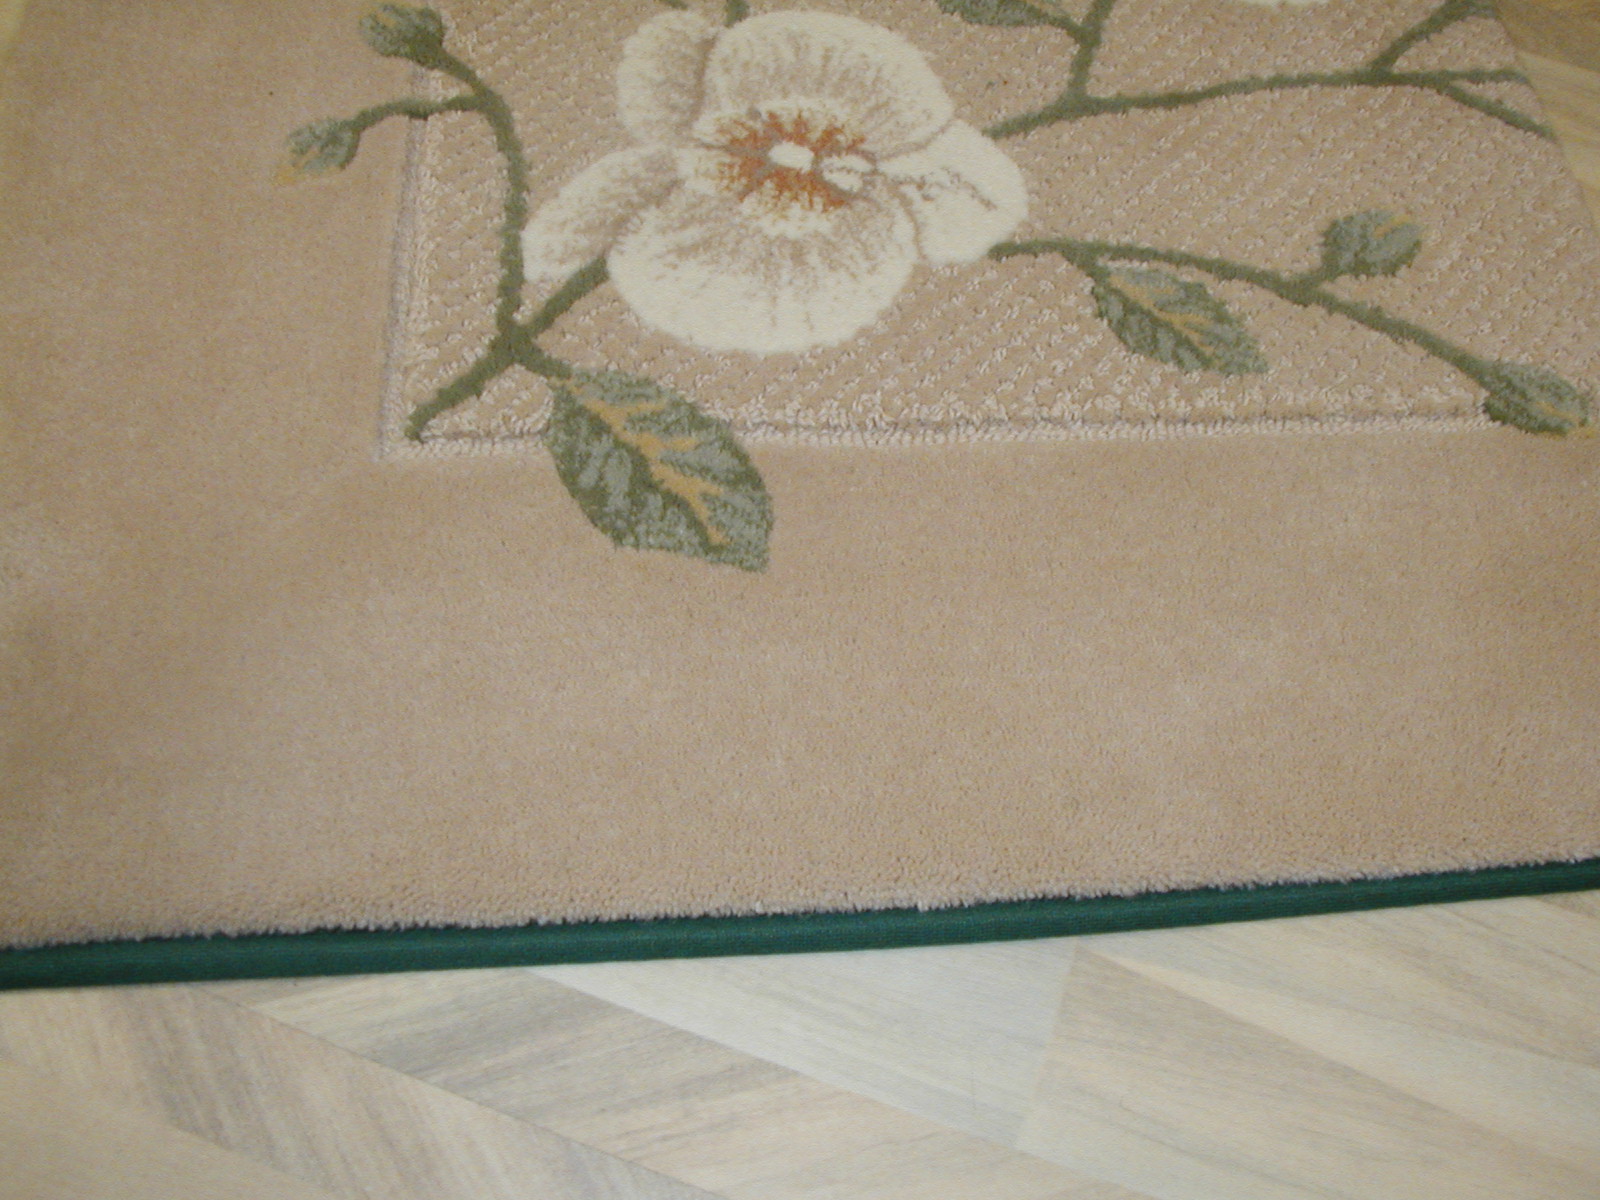 How to Bind Carpet Edges with Instabind